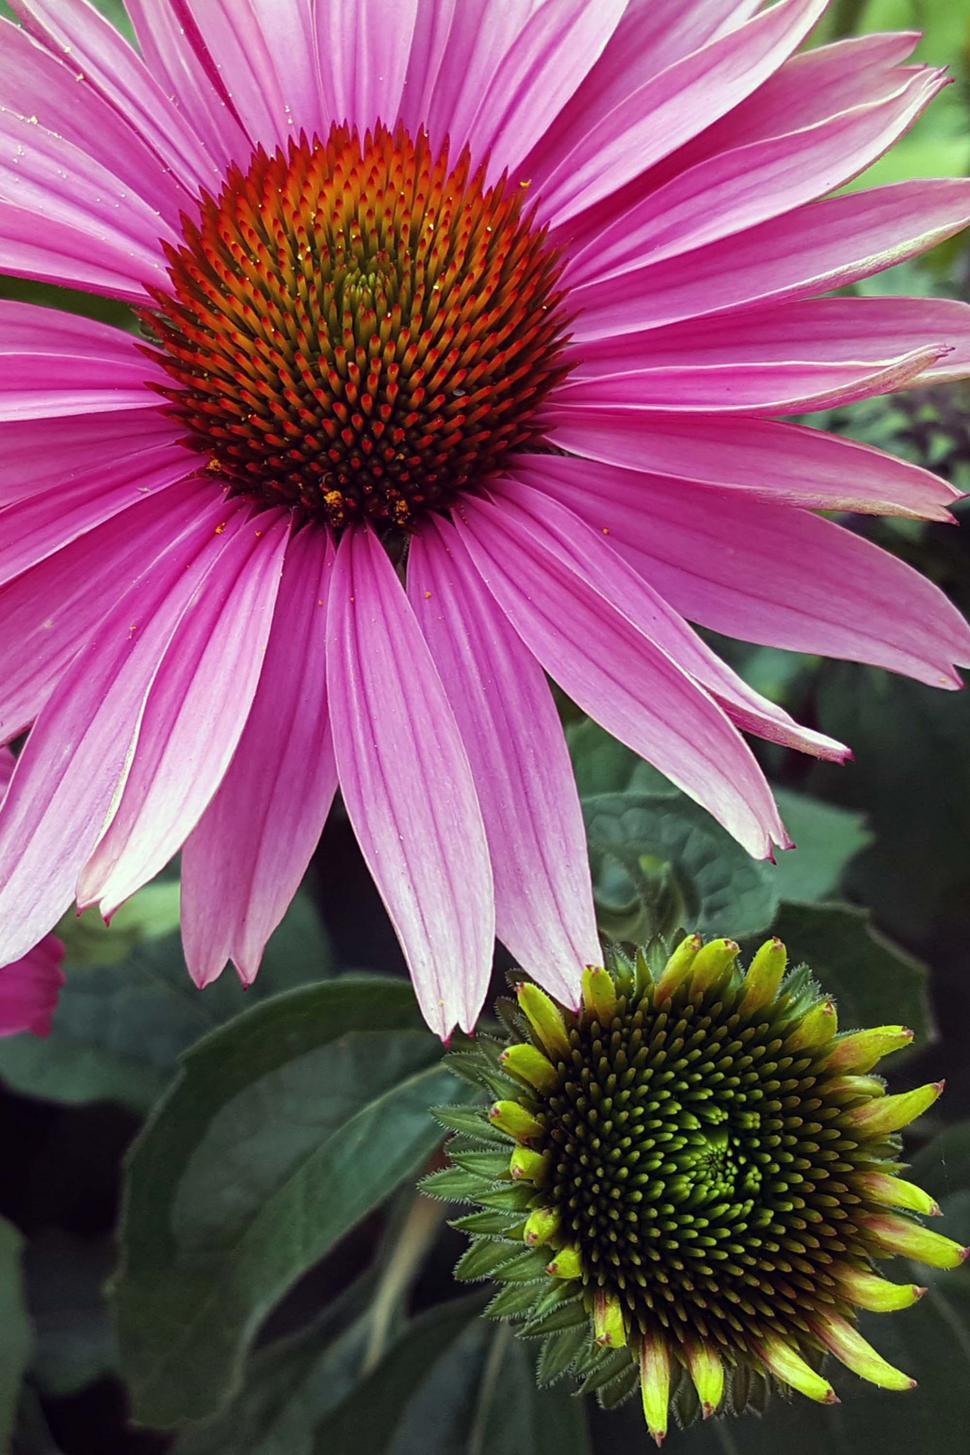 Free Image of Coneflower Pink Flower And Bud 